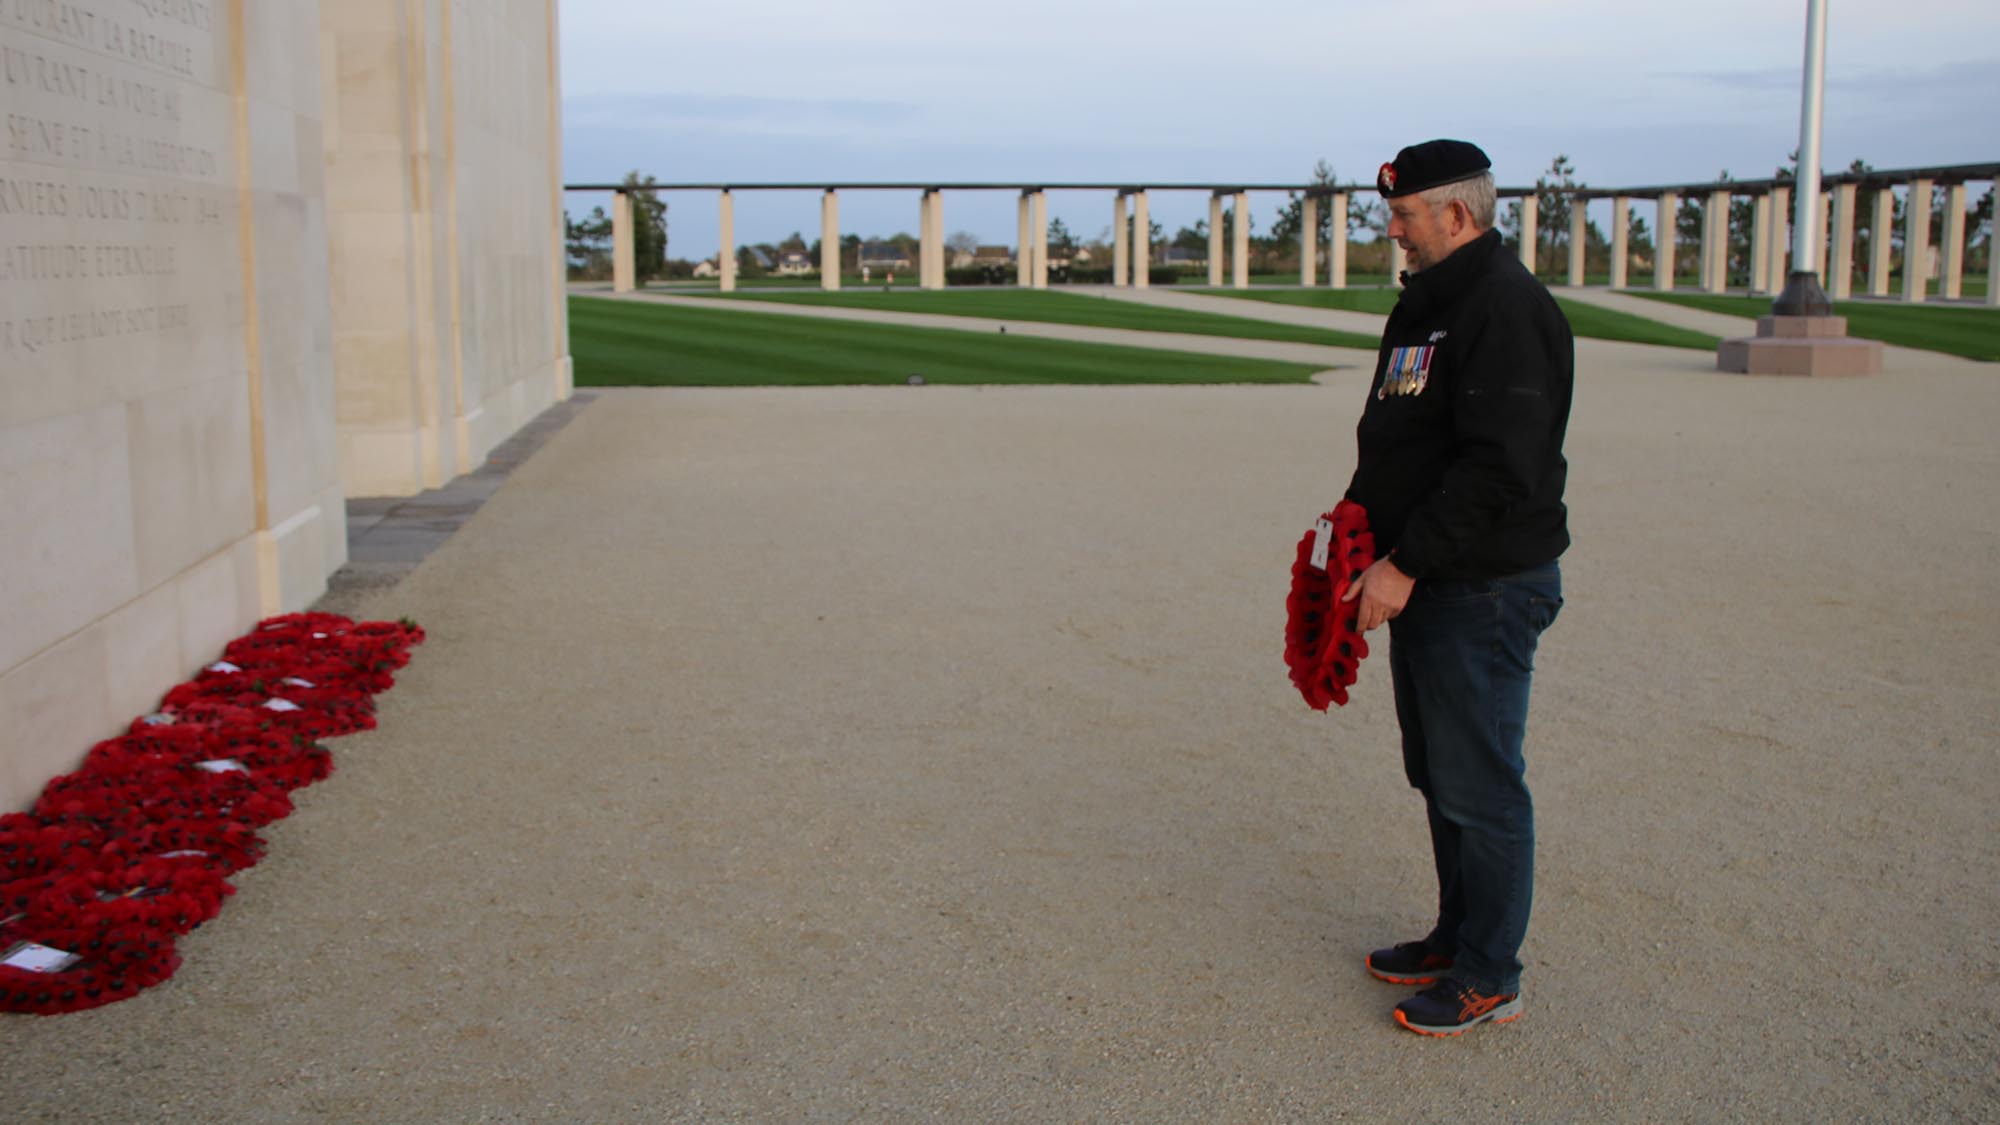 Remembrance Day - SUEZ Veterans lay wreath at British Normandy Memorial